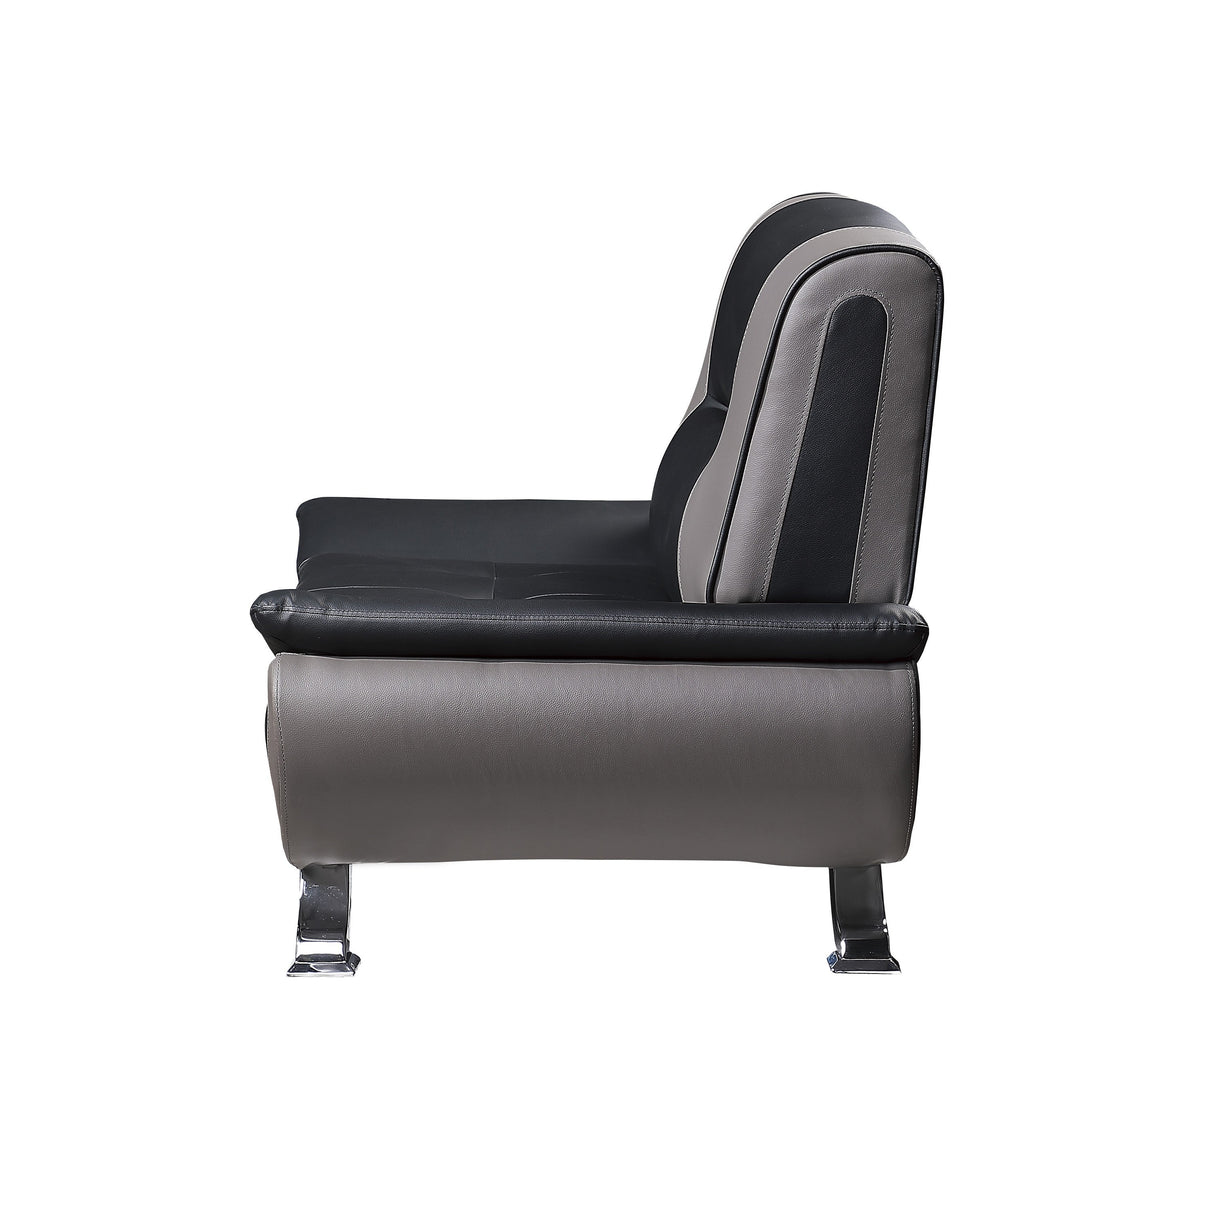 Veloce Black/Gray Faux Leather Chair